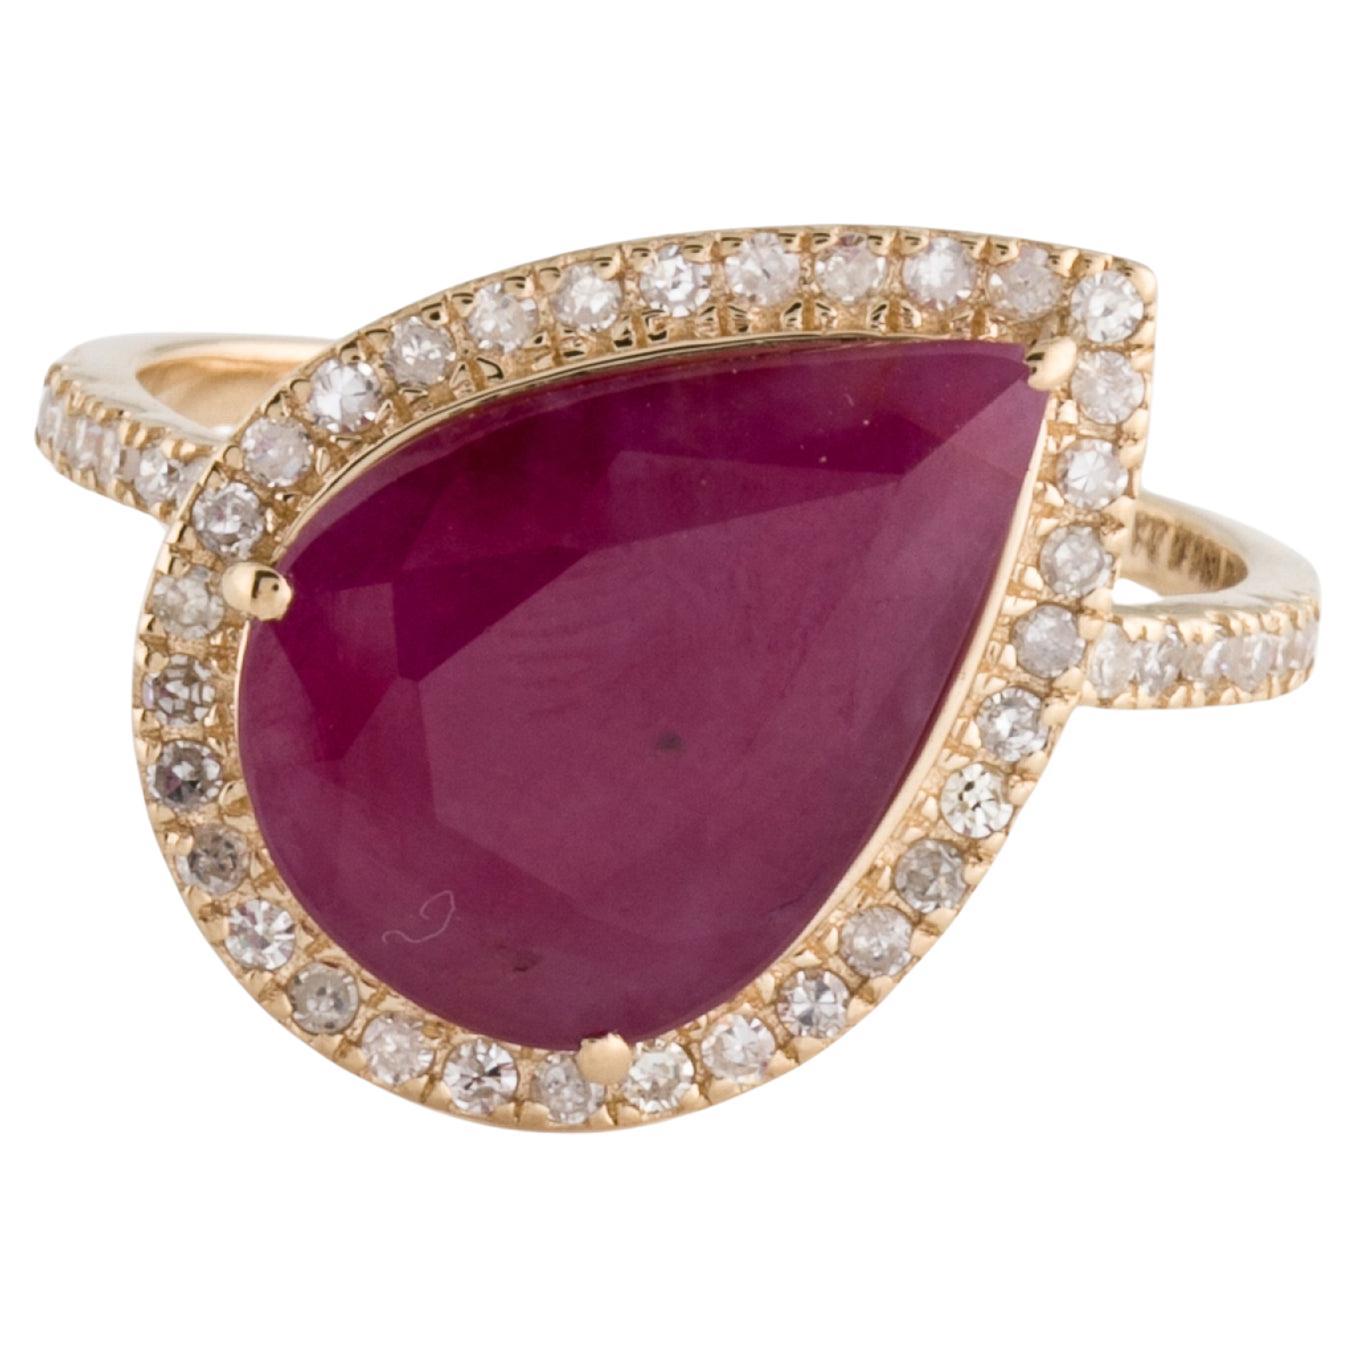 Luxurious 14K Ruby & Diamond Cocktail Ring 5.17ctw - Size 8 - Statement Jewelry For Sale